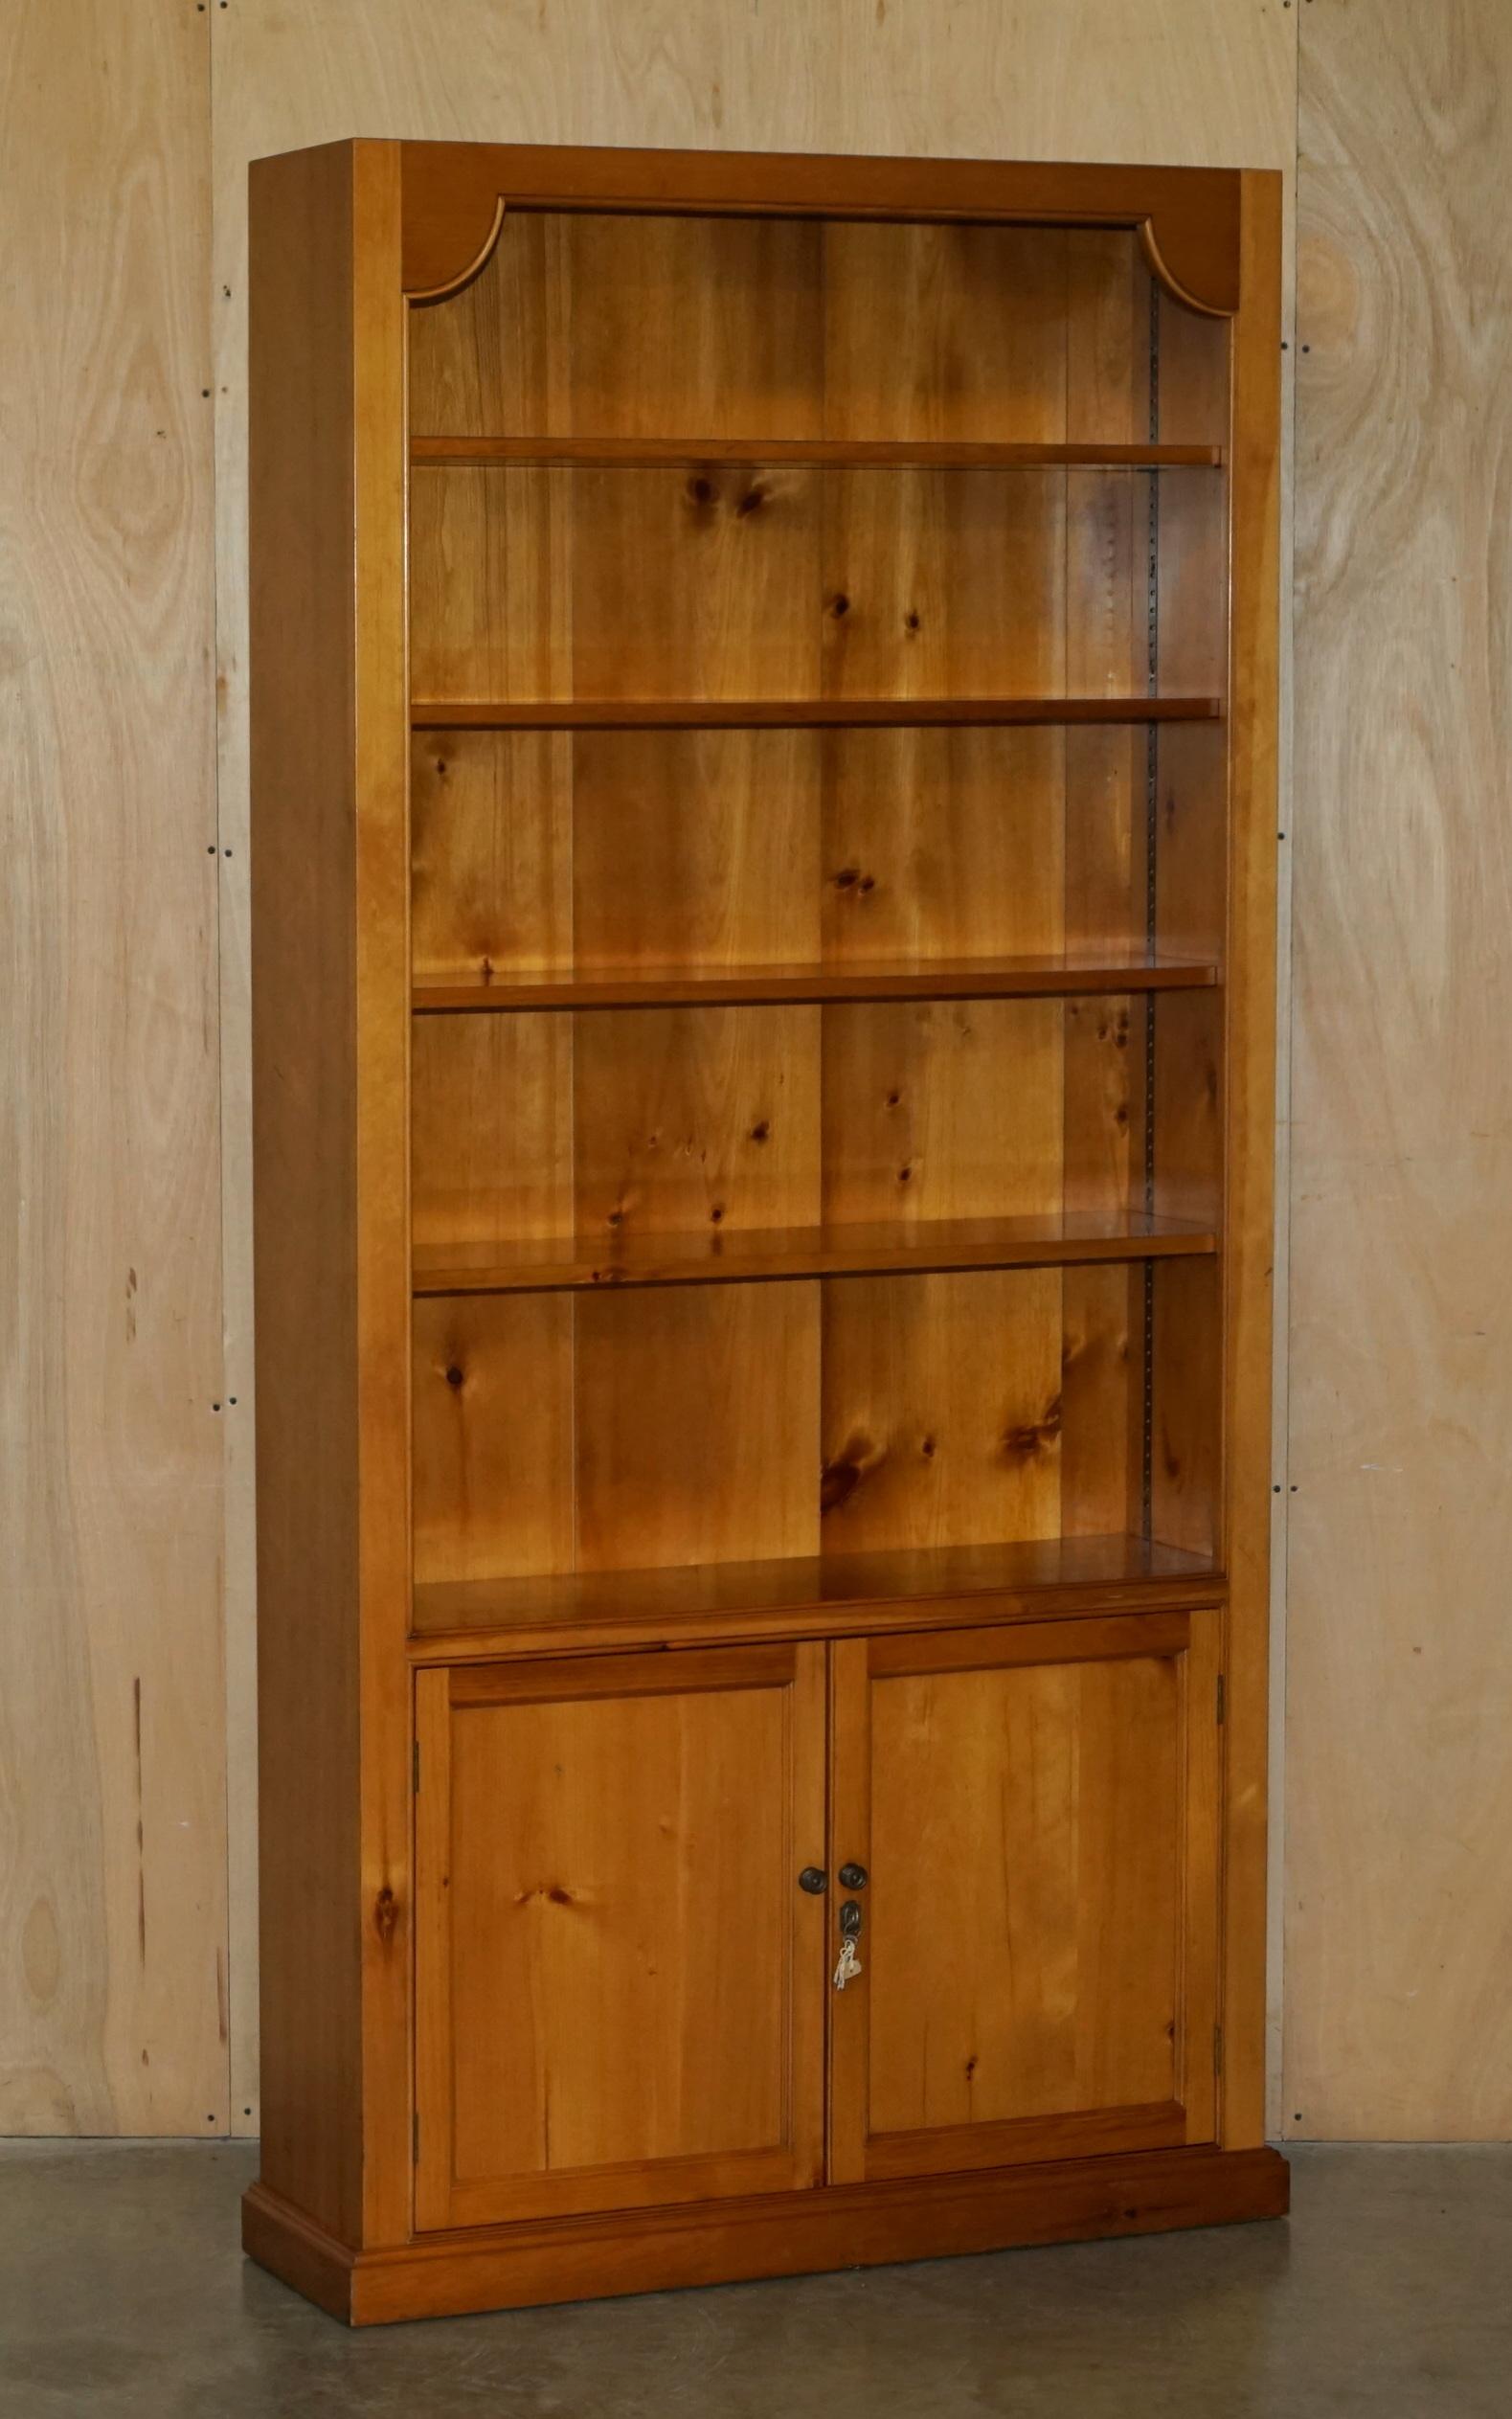 Royal House Antiques

Royal House Antiques is delighted to offer for sale this pair of vintage solid Cherrywood open library bookcases with lockable cupboard bases 

Please note the delivery fee listed is just a guide, it covers within the M25 only